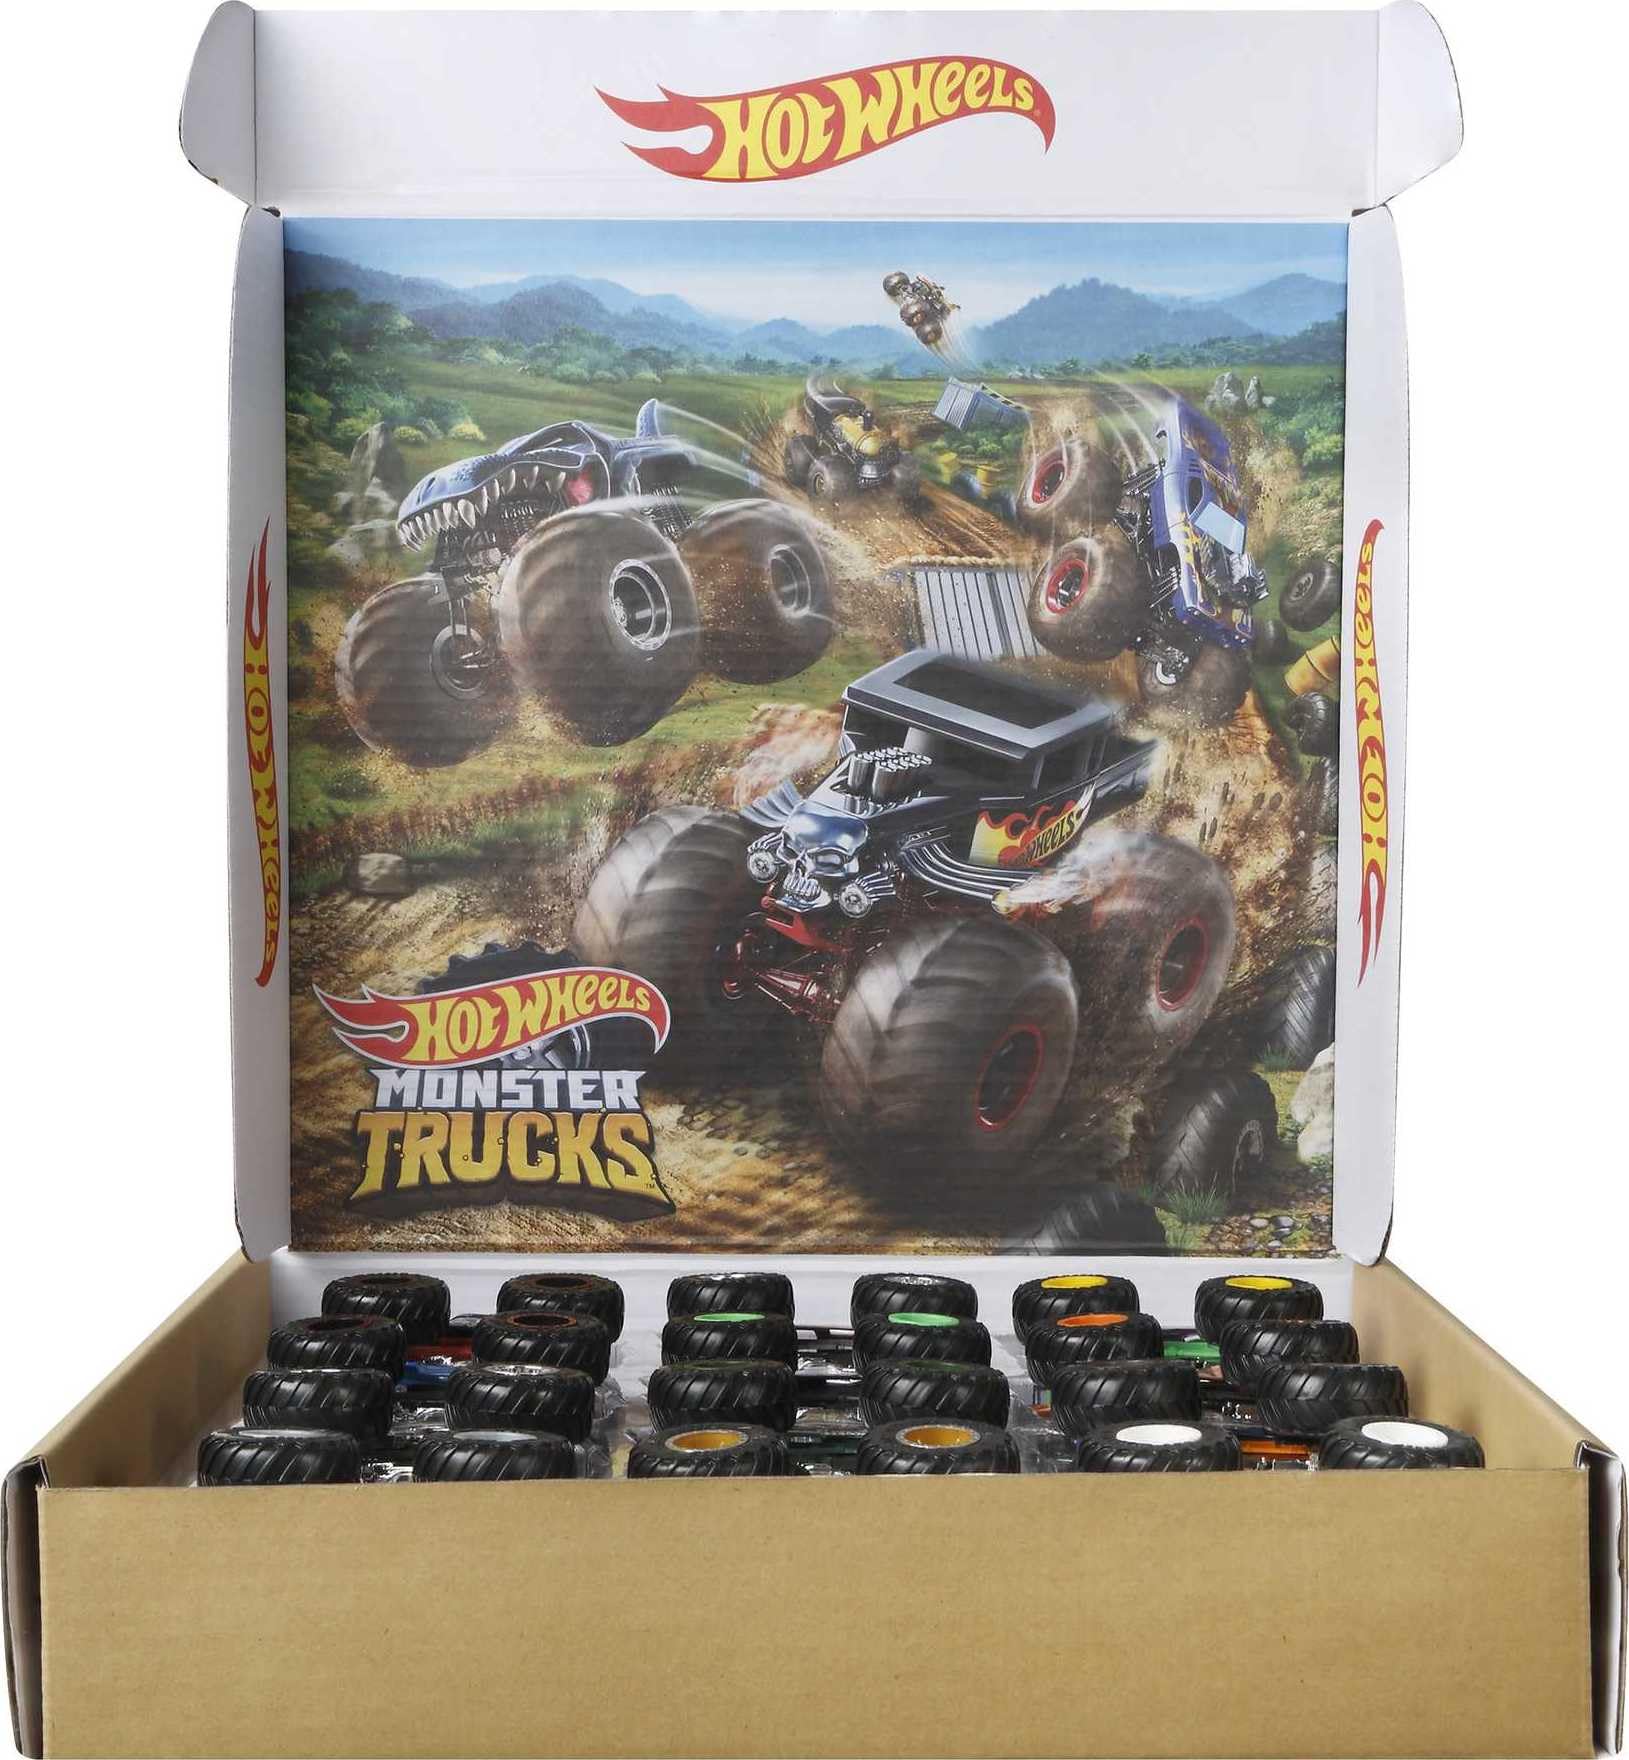 Hot Wheels Monster Trucks Set of 12 1:64 Scale Die-Cast Toy Trucks, Collectible Vehicles (Styles May Vary) (Amazon Exclusive)